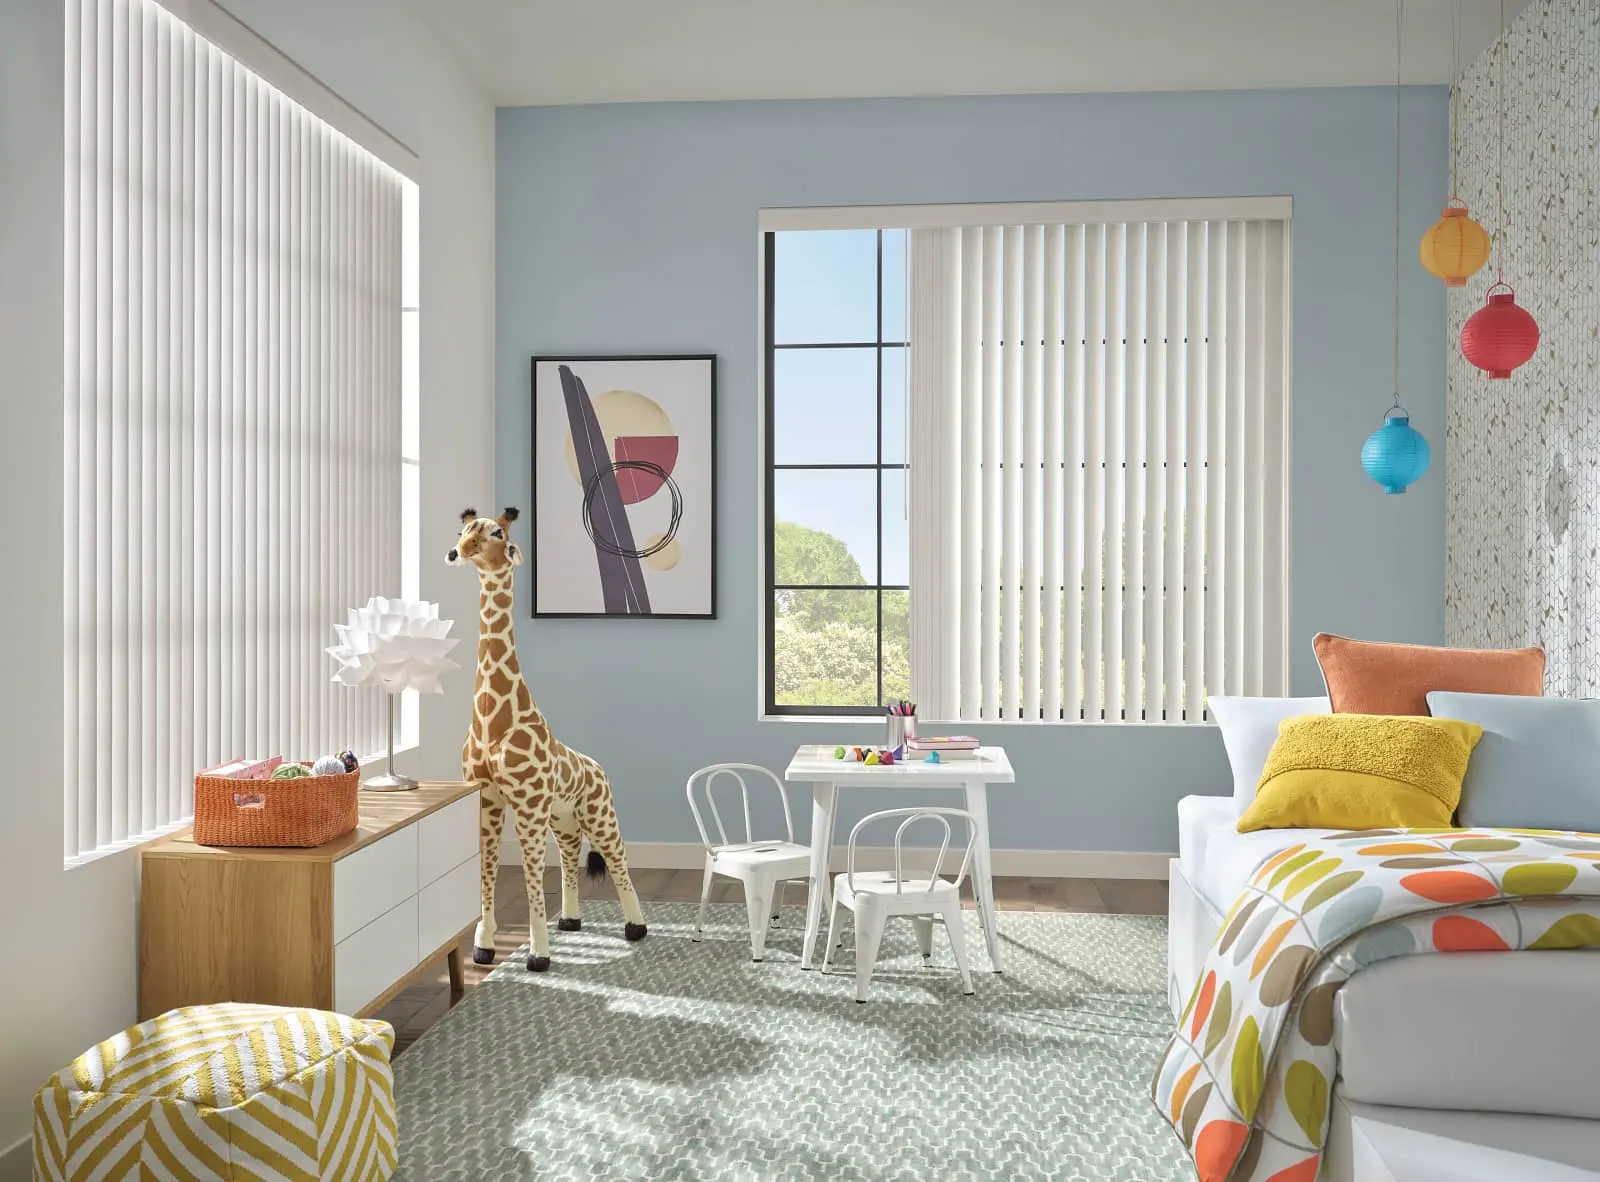 Vertical Solutions vertical blinds in a child's bedroom